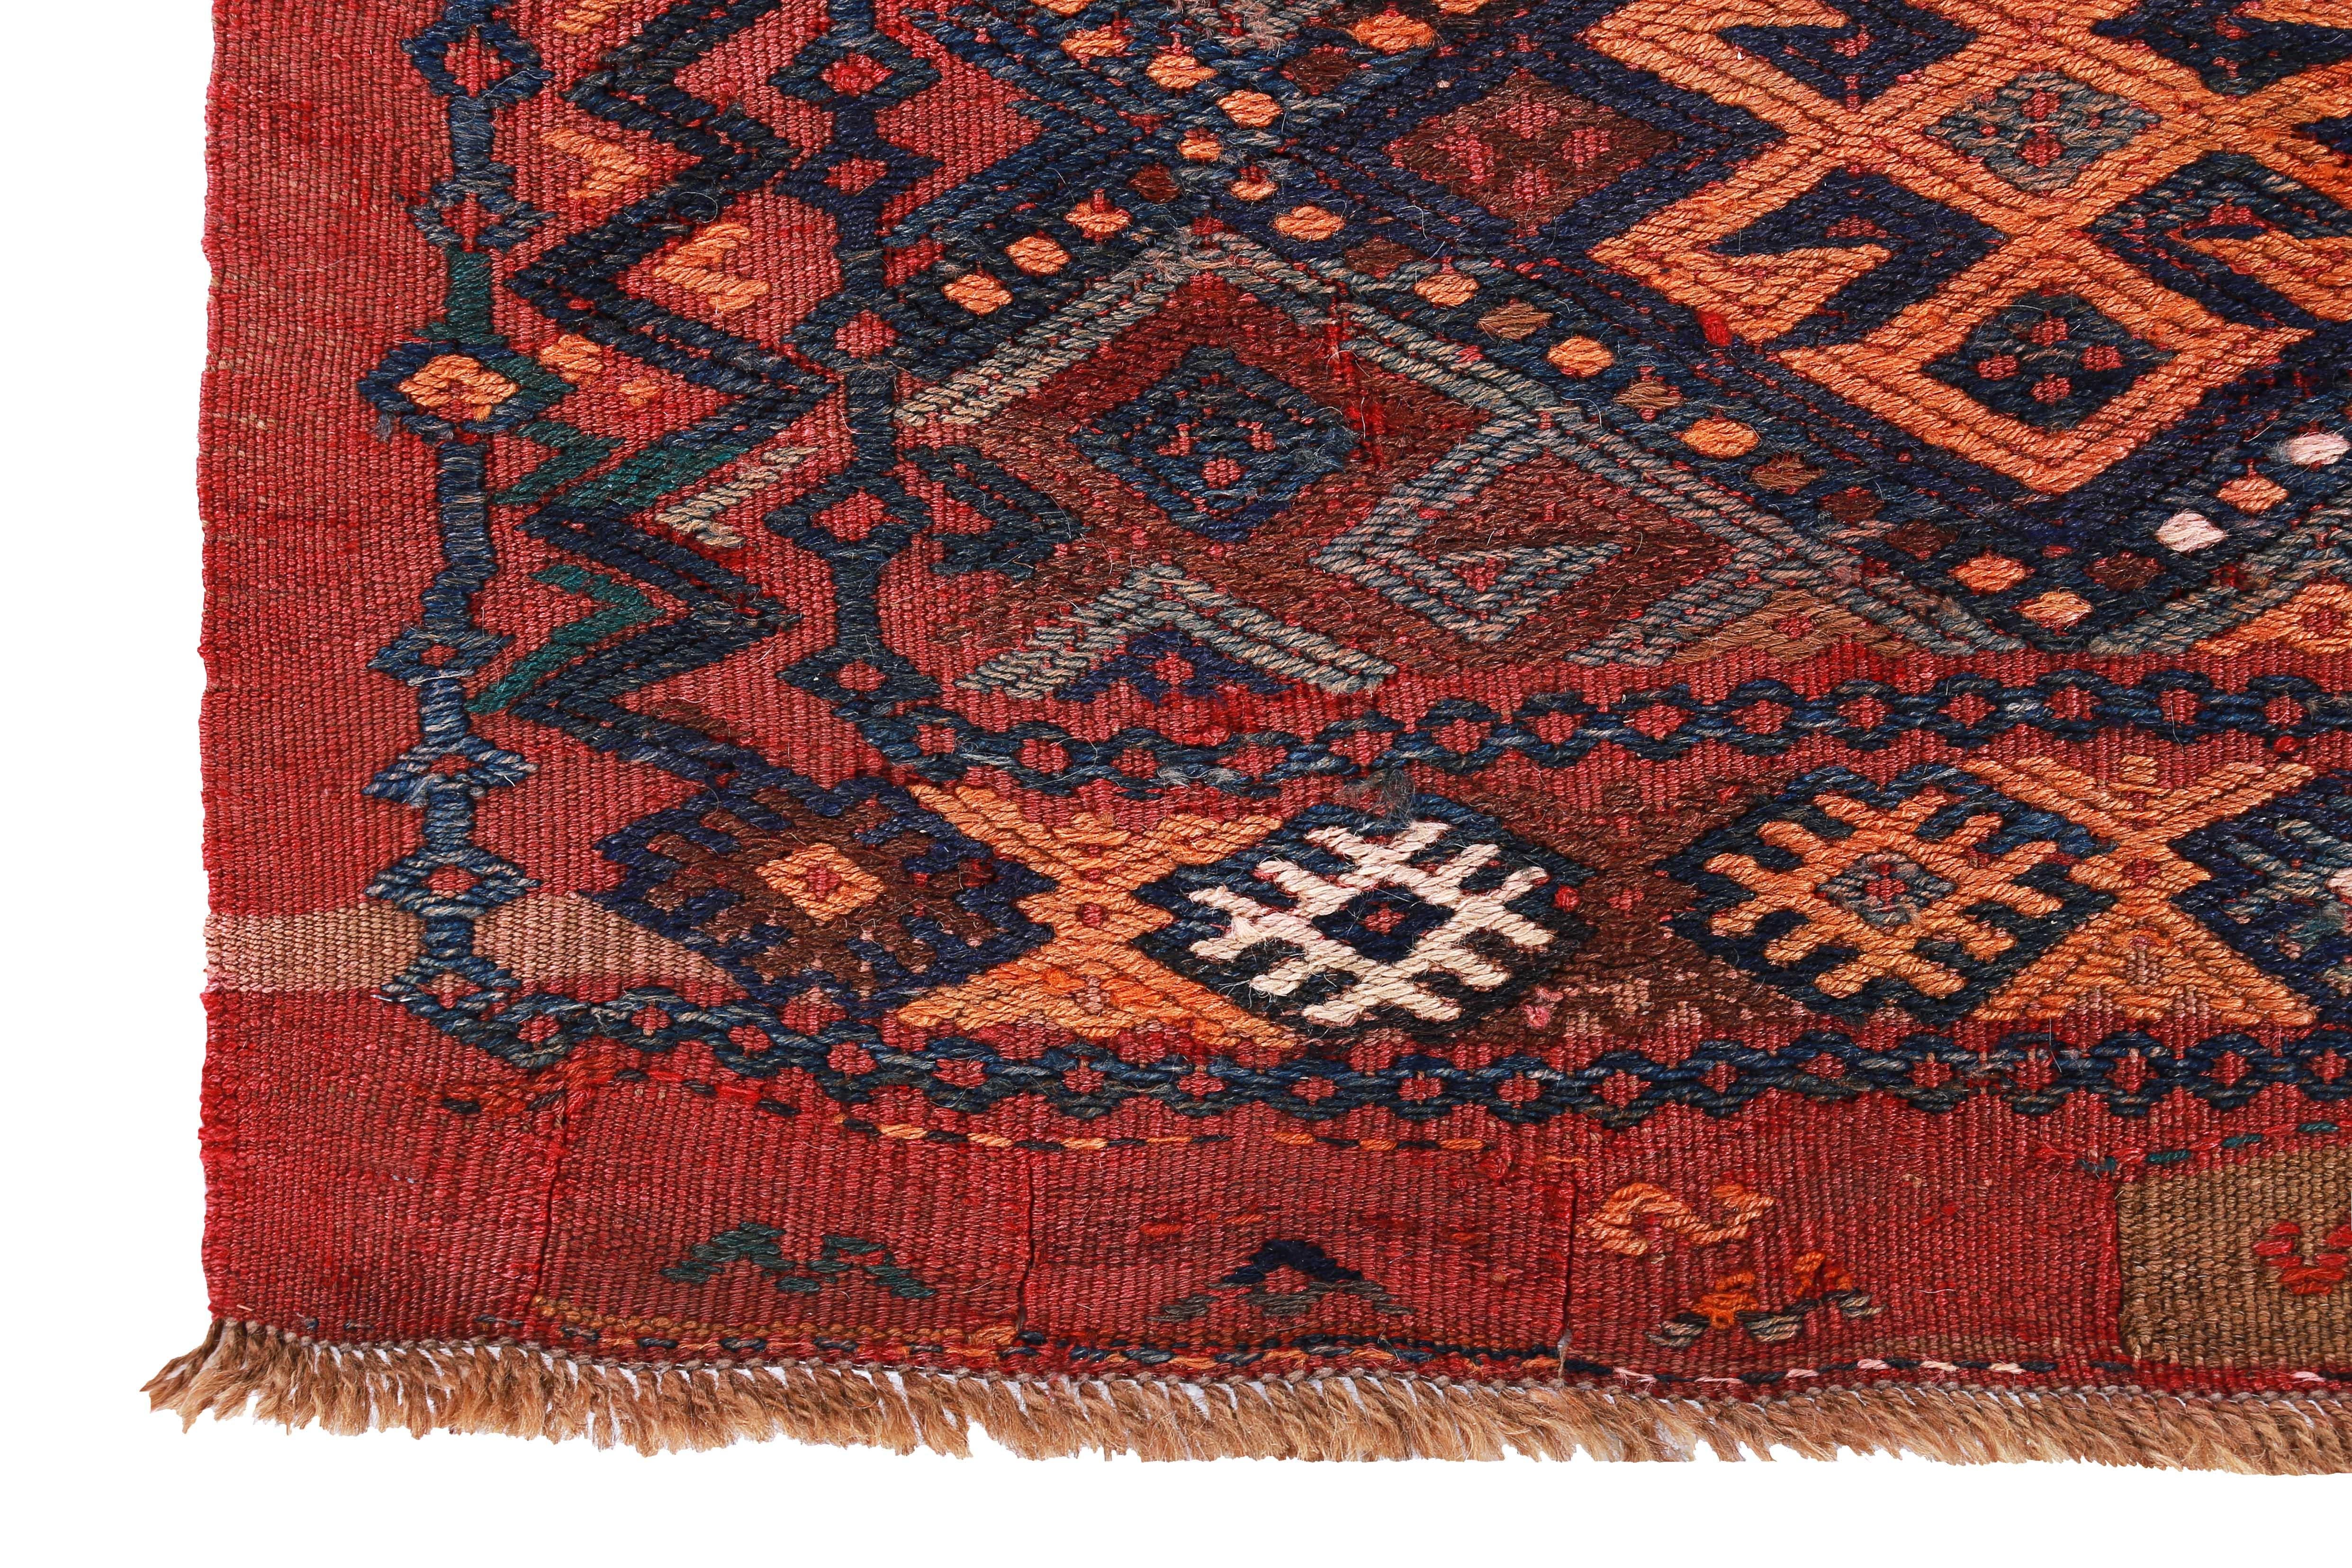 Hand-Woven Turkish Kilim Rug in Red Orange and Tribal Stripes in Green and Brown For Sale